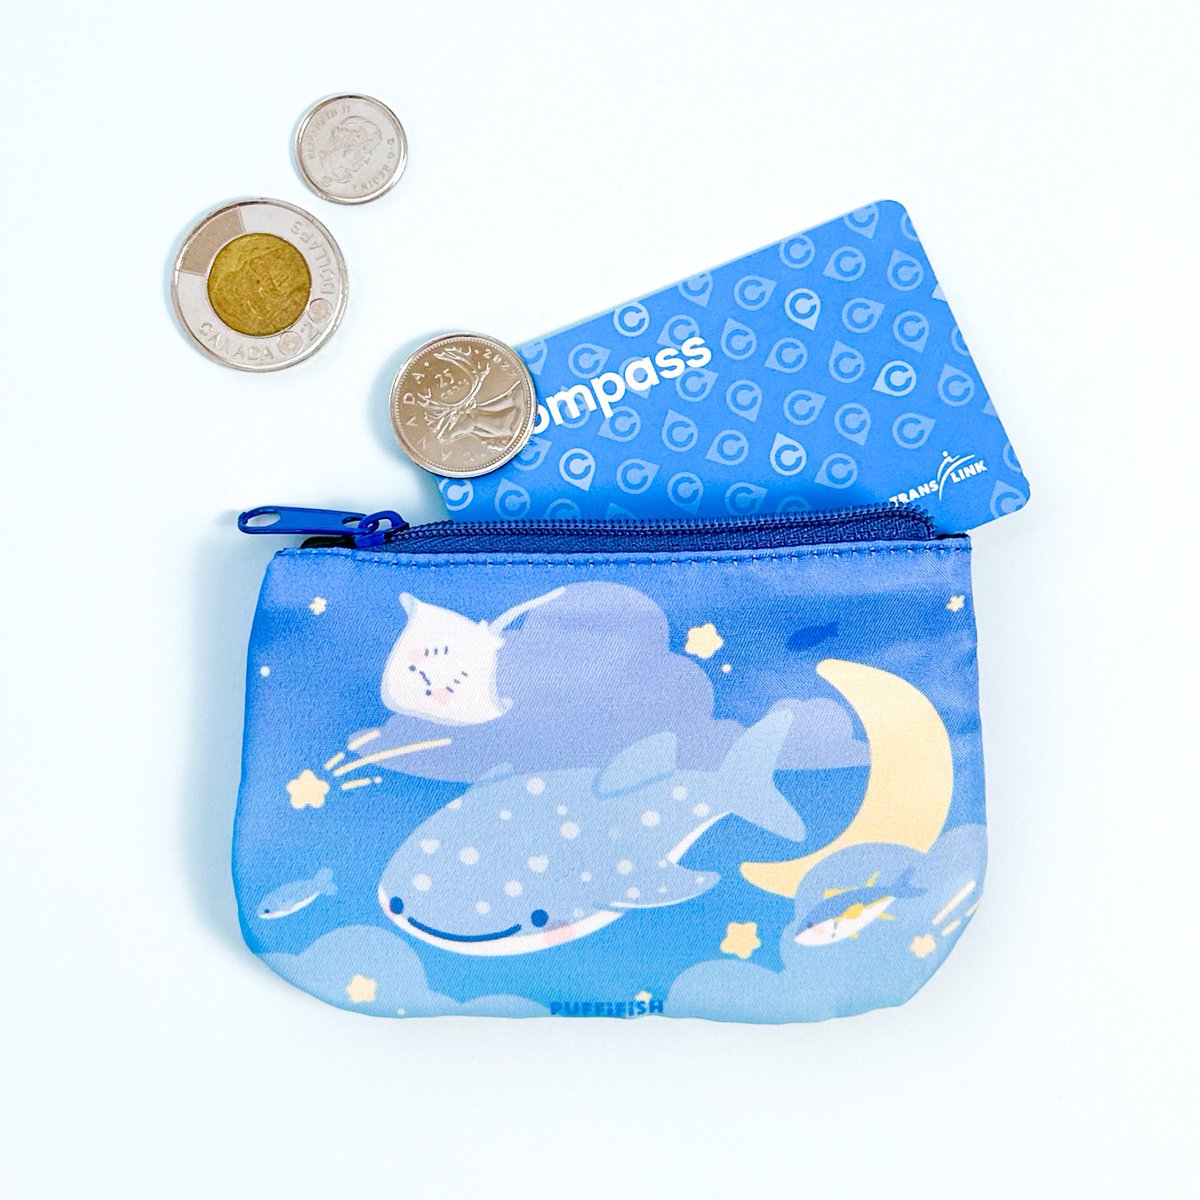 「Starry ocean coin pouch  」|puffi🐟のイラスト